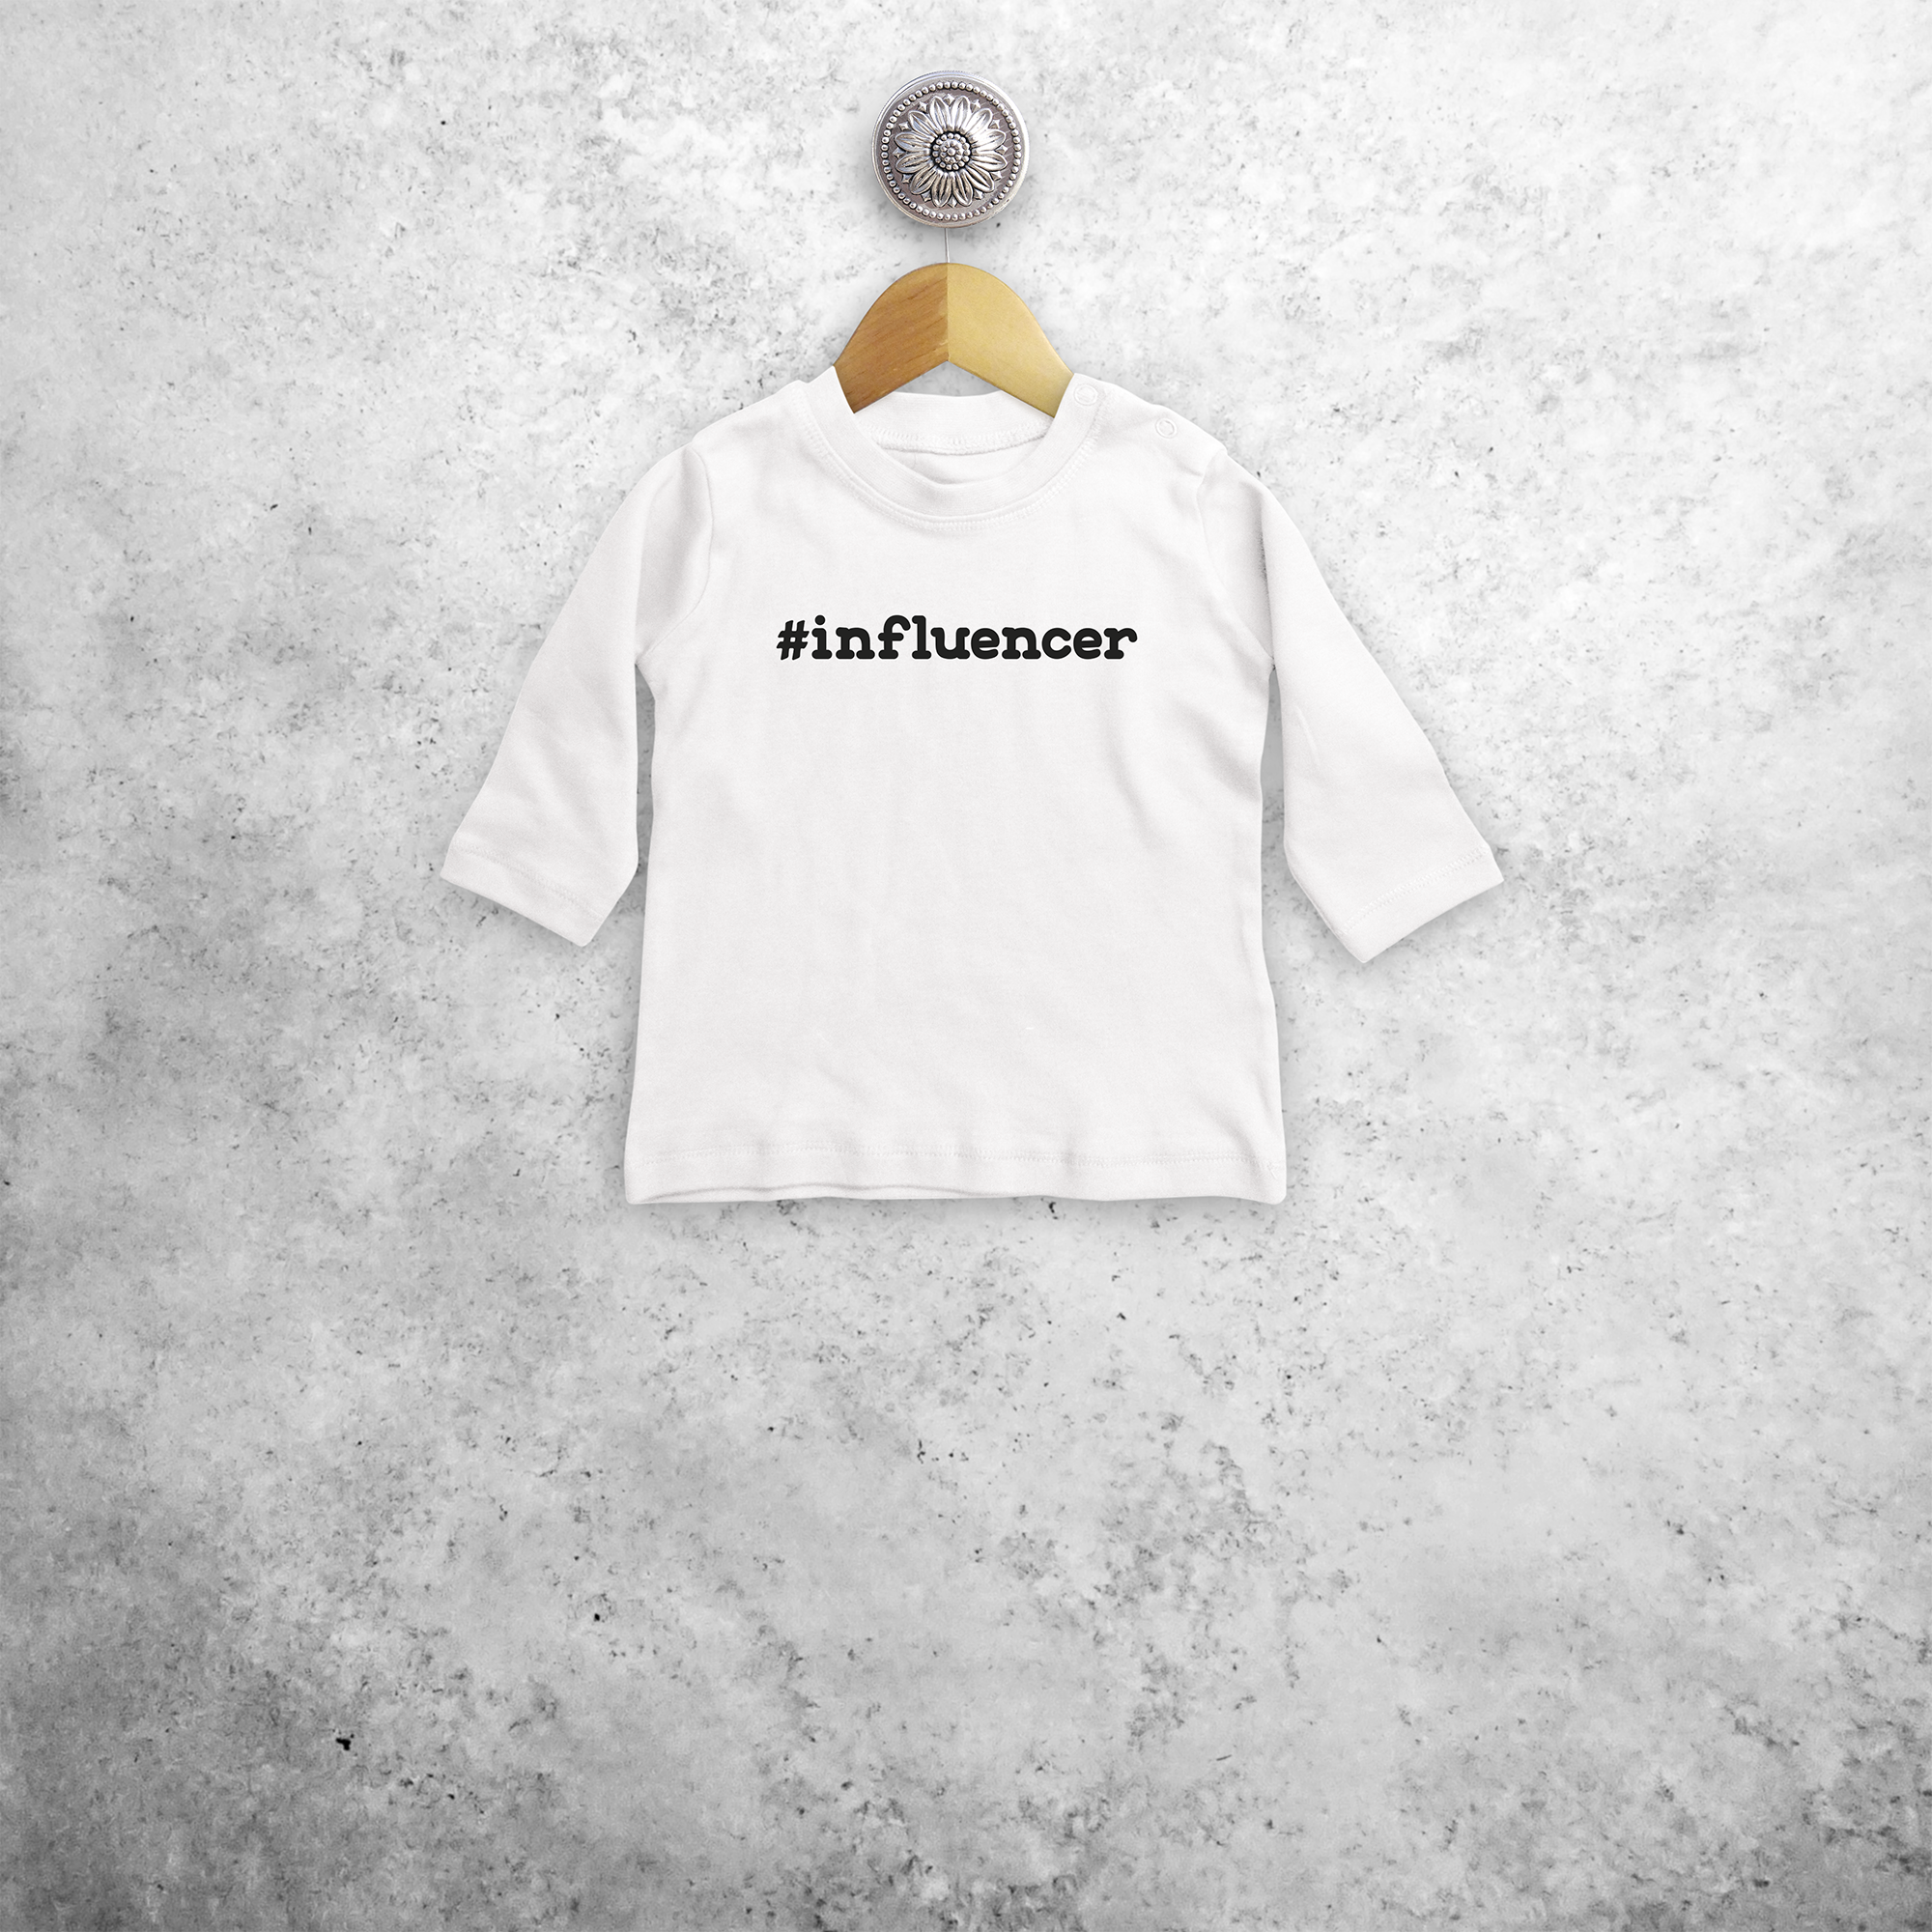 Baby or toddler shirt with long sleeves, with '#influencer' print by KMLeon.